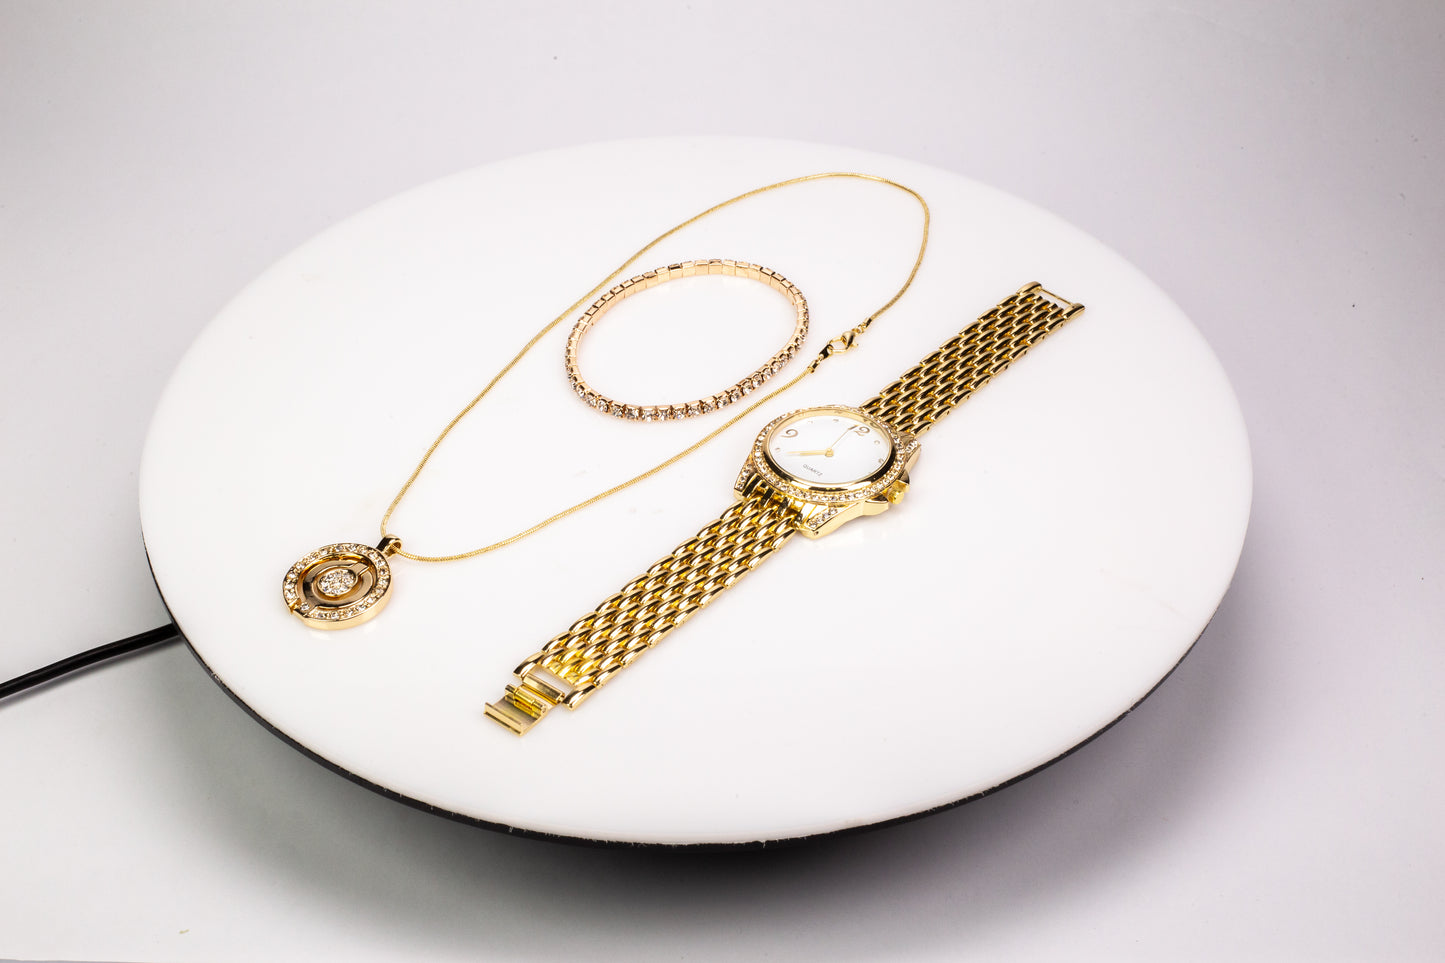 3 pieces Gold Plated Alloy Set of Quartz Watch (19 cm), stretchable Bracelet (21 cm) and pendant necklace (46 cm) with White Emporia Crystals, white dial